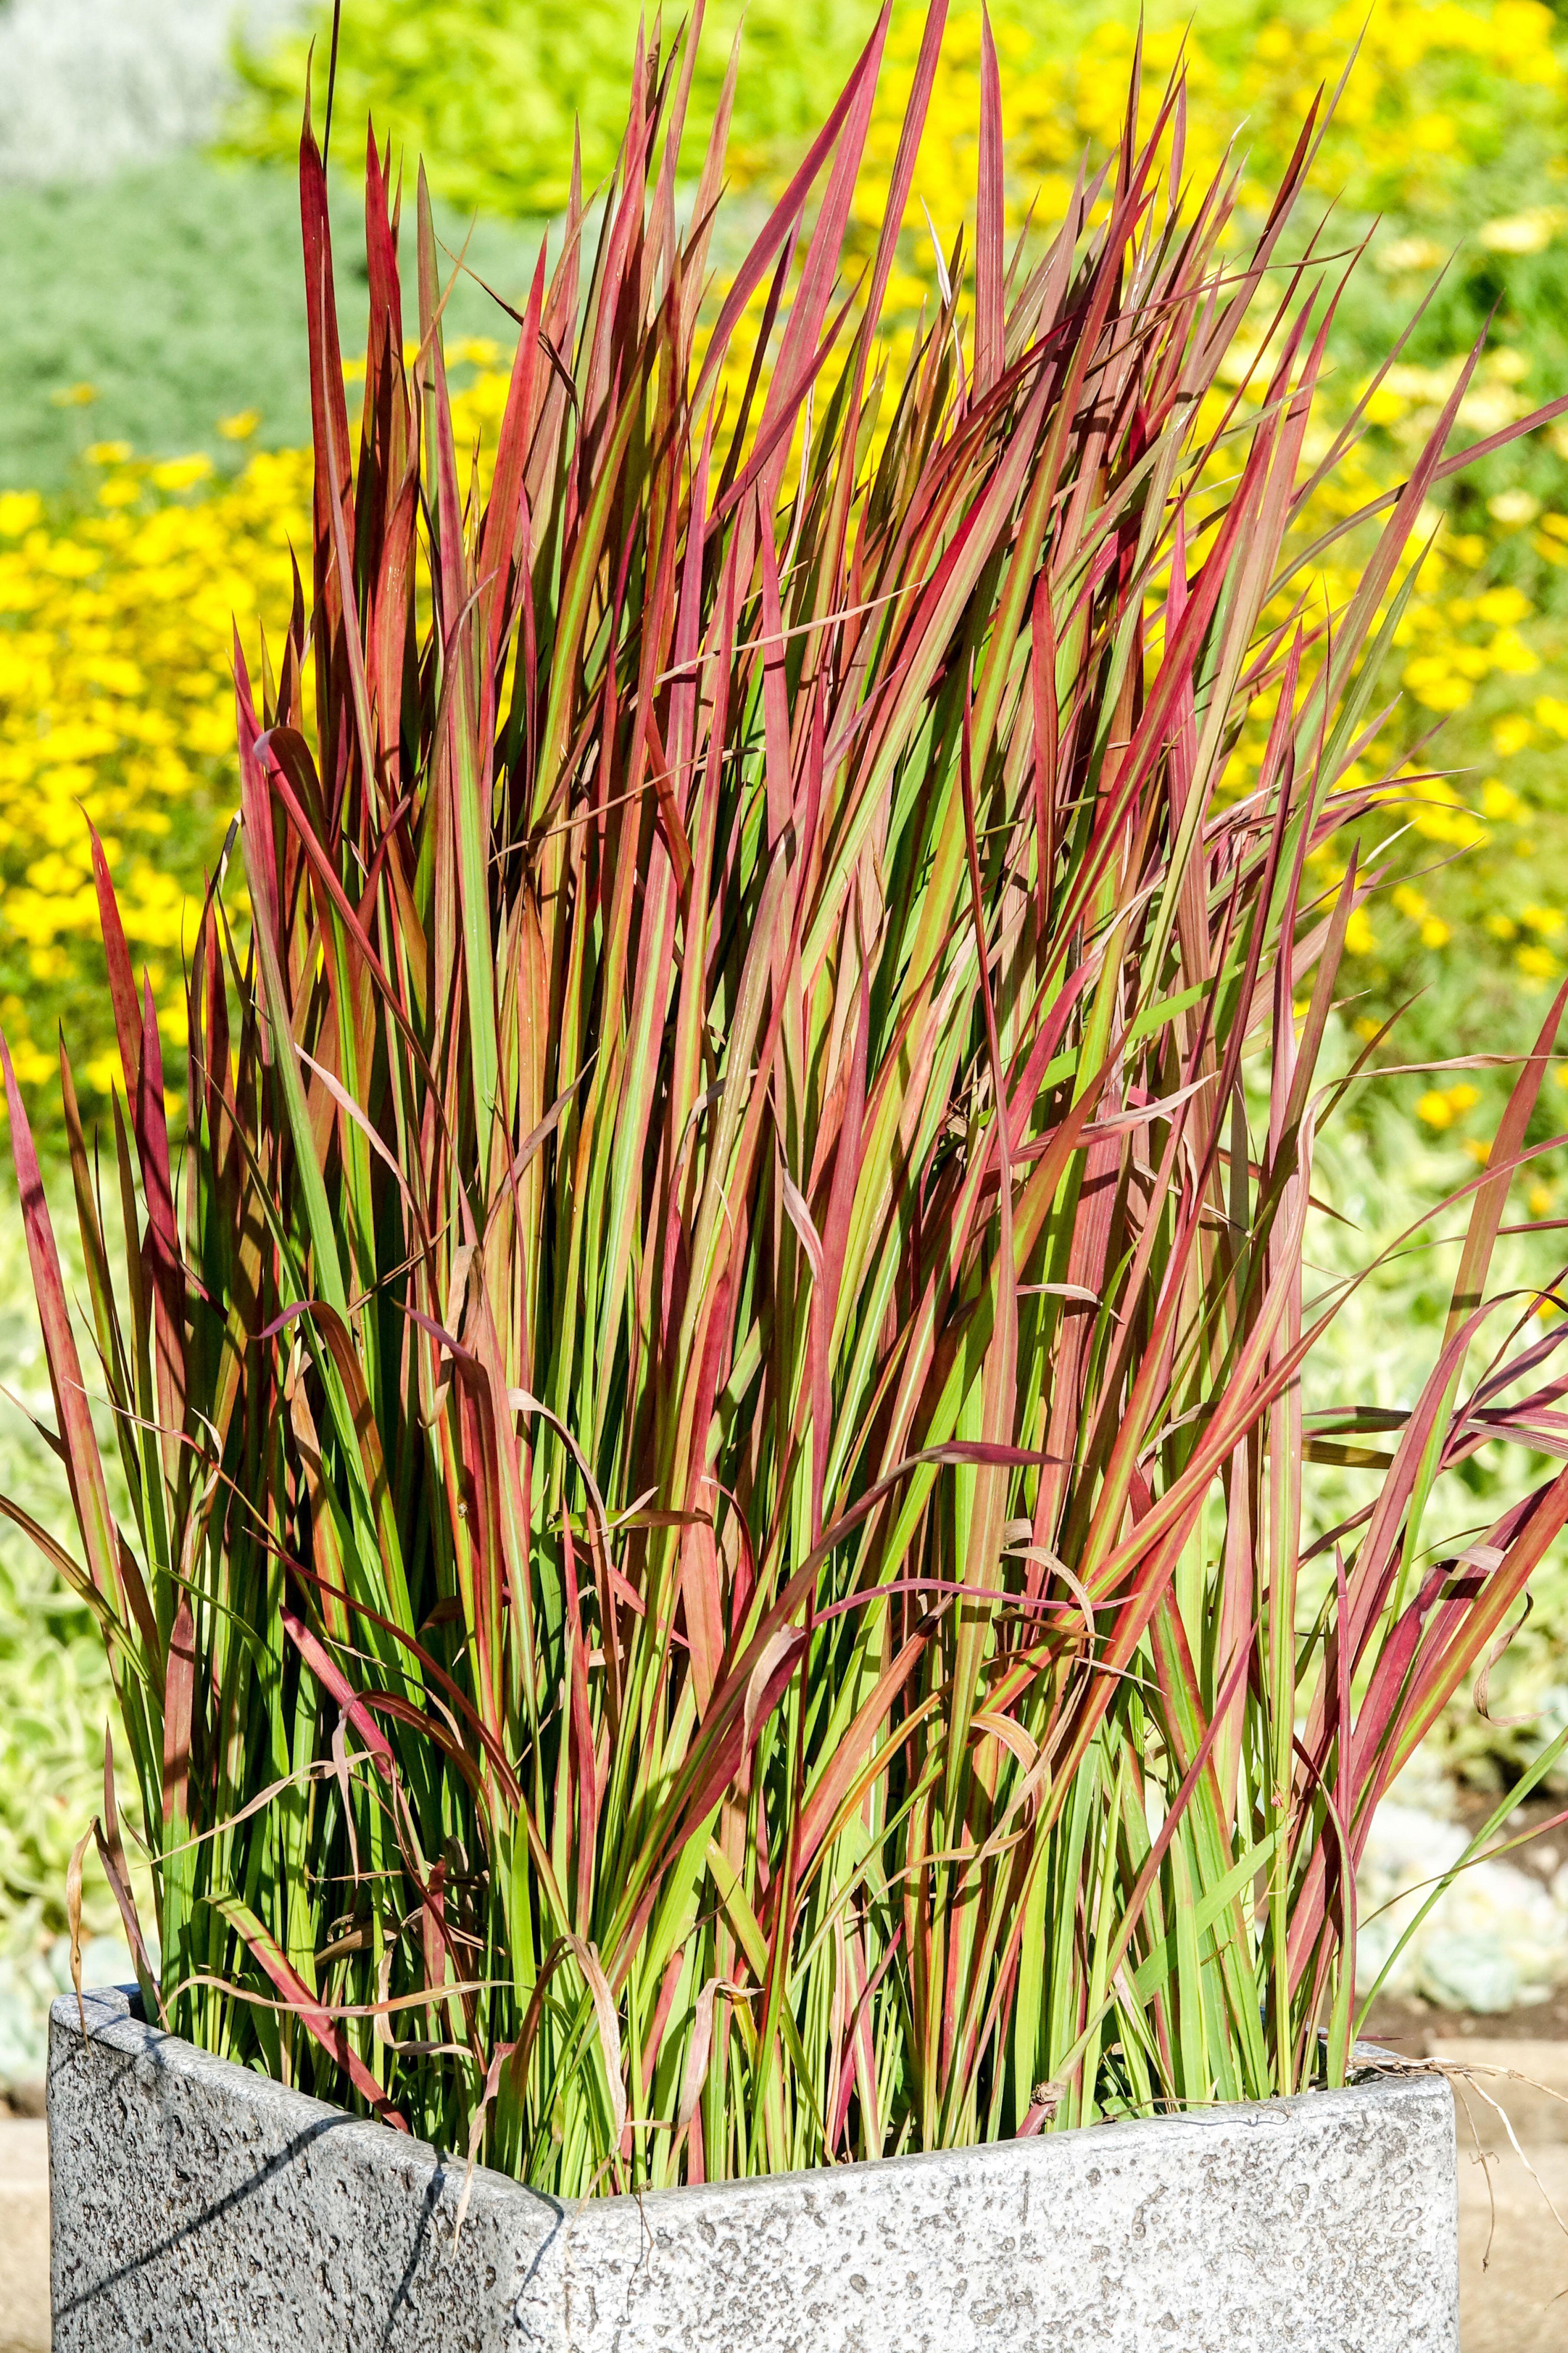 Japanese blood grass in a pot (Alamy/PA)